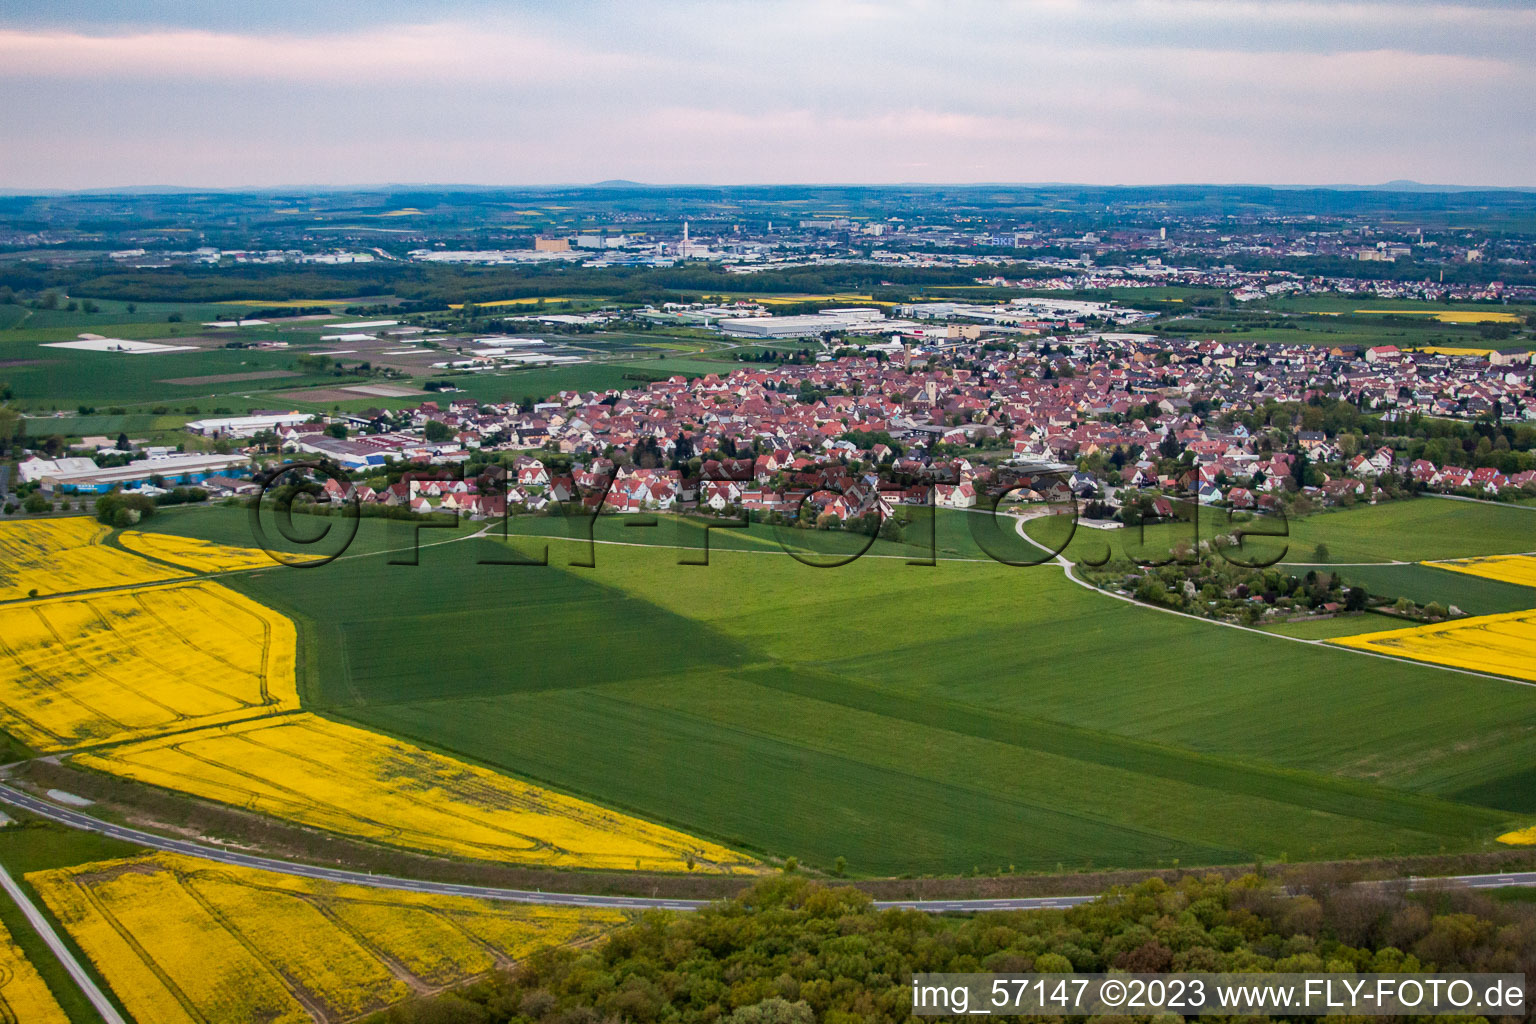 Gochsheim in the state Bavaria, Germany seen from above